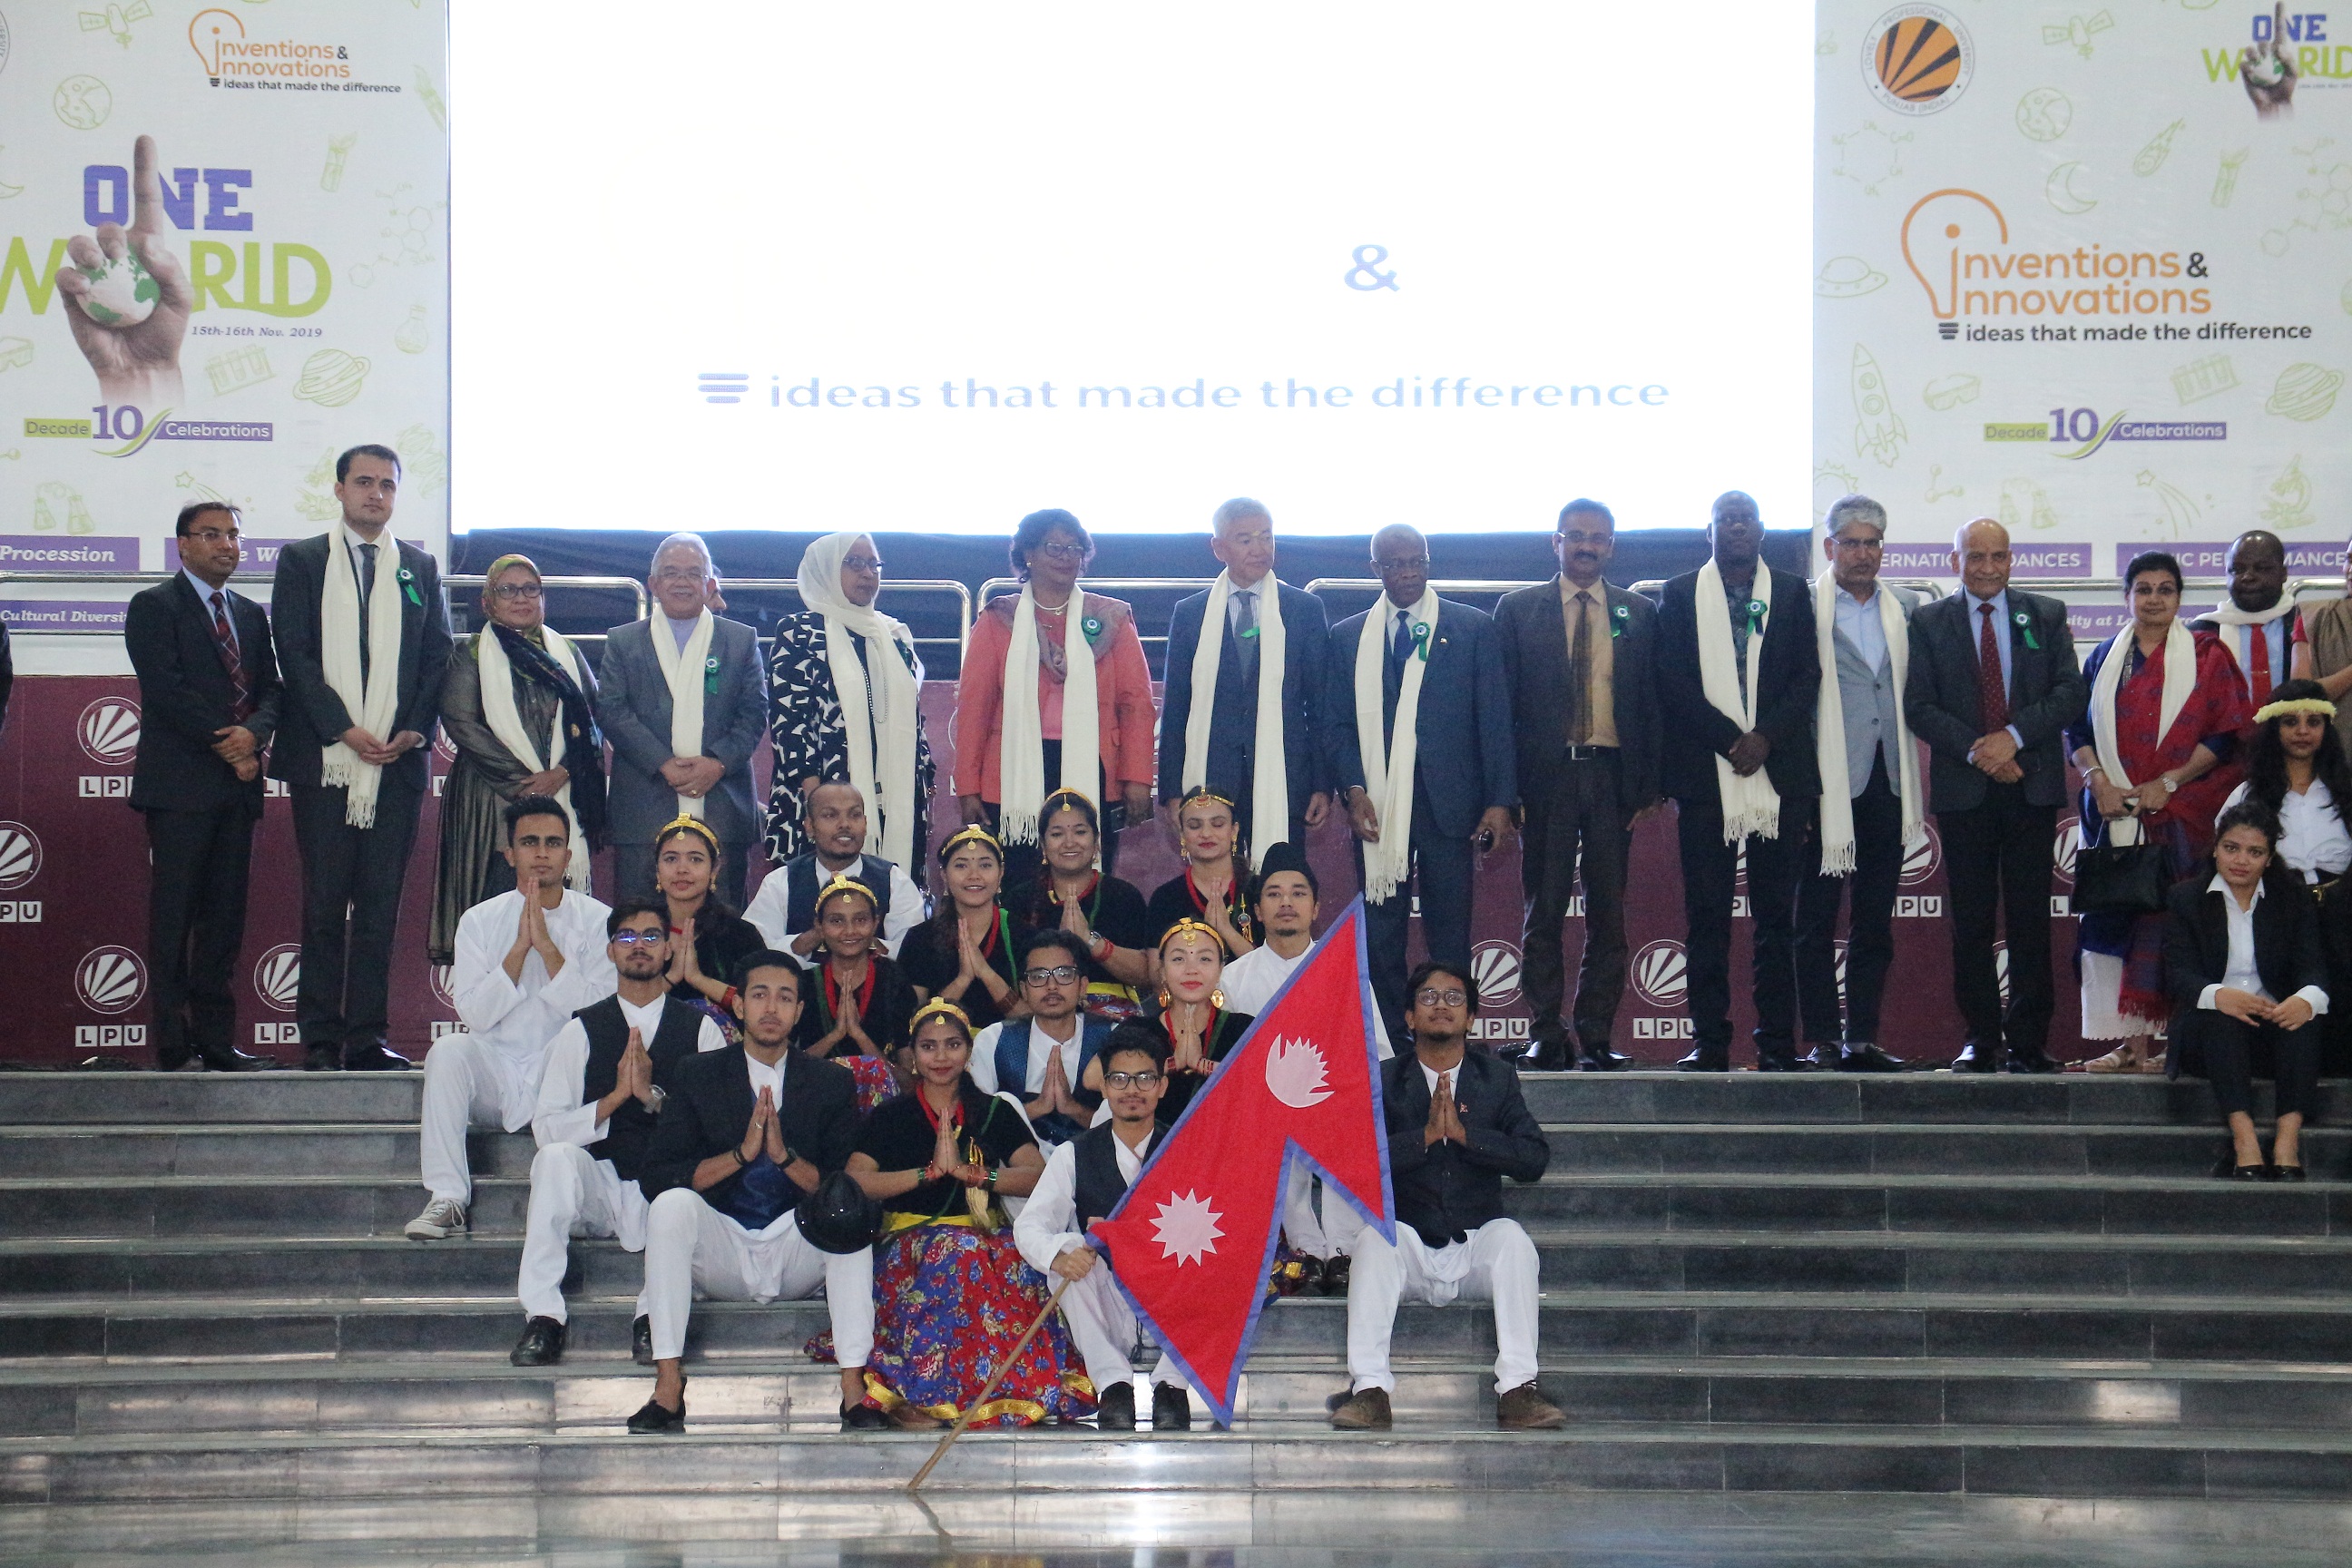 LPU Chancellor Mr Ashok Mittal standing along Ambassadors and Diplomats from six Nations during an annual ONE WORLD fest at LPU campus